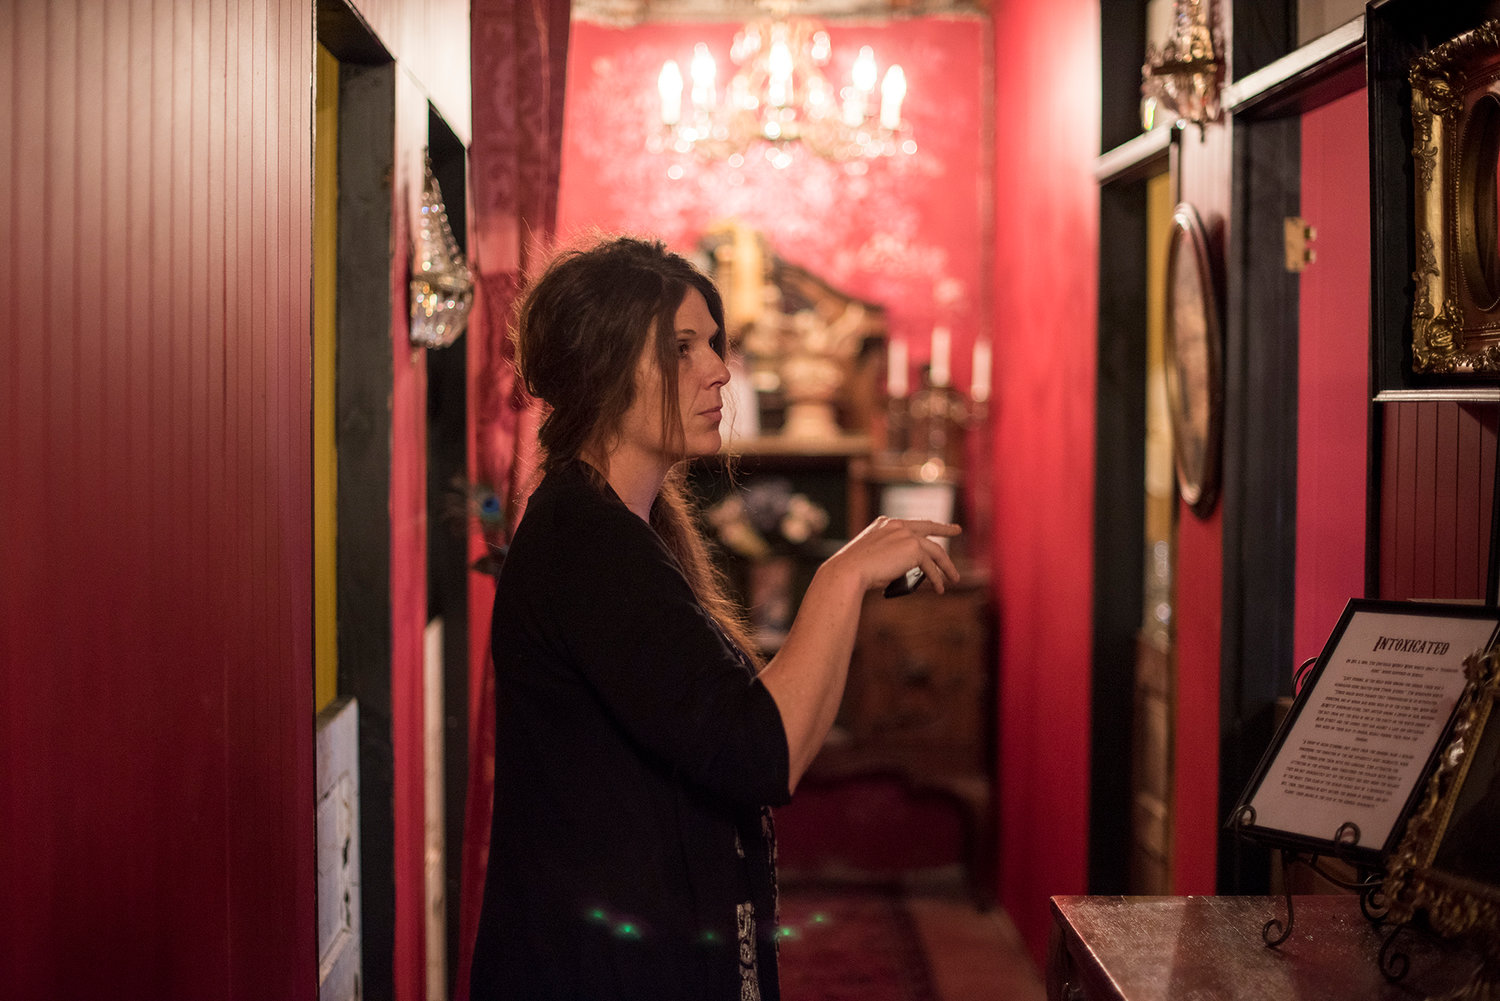 Ornate chandeliers hang from the ceilings as Holly Phelps, owner of the Shady Lady in downtown Centralia, stands in one of the hallways of her new Bordello Museum.